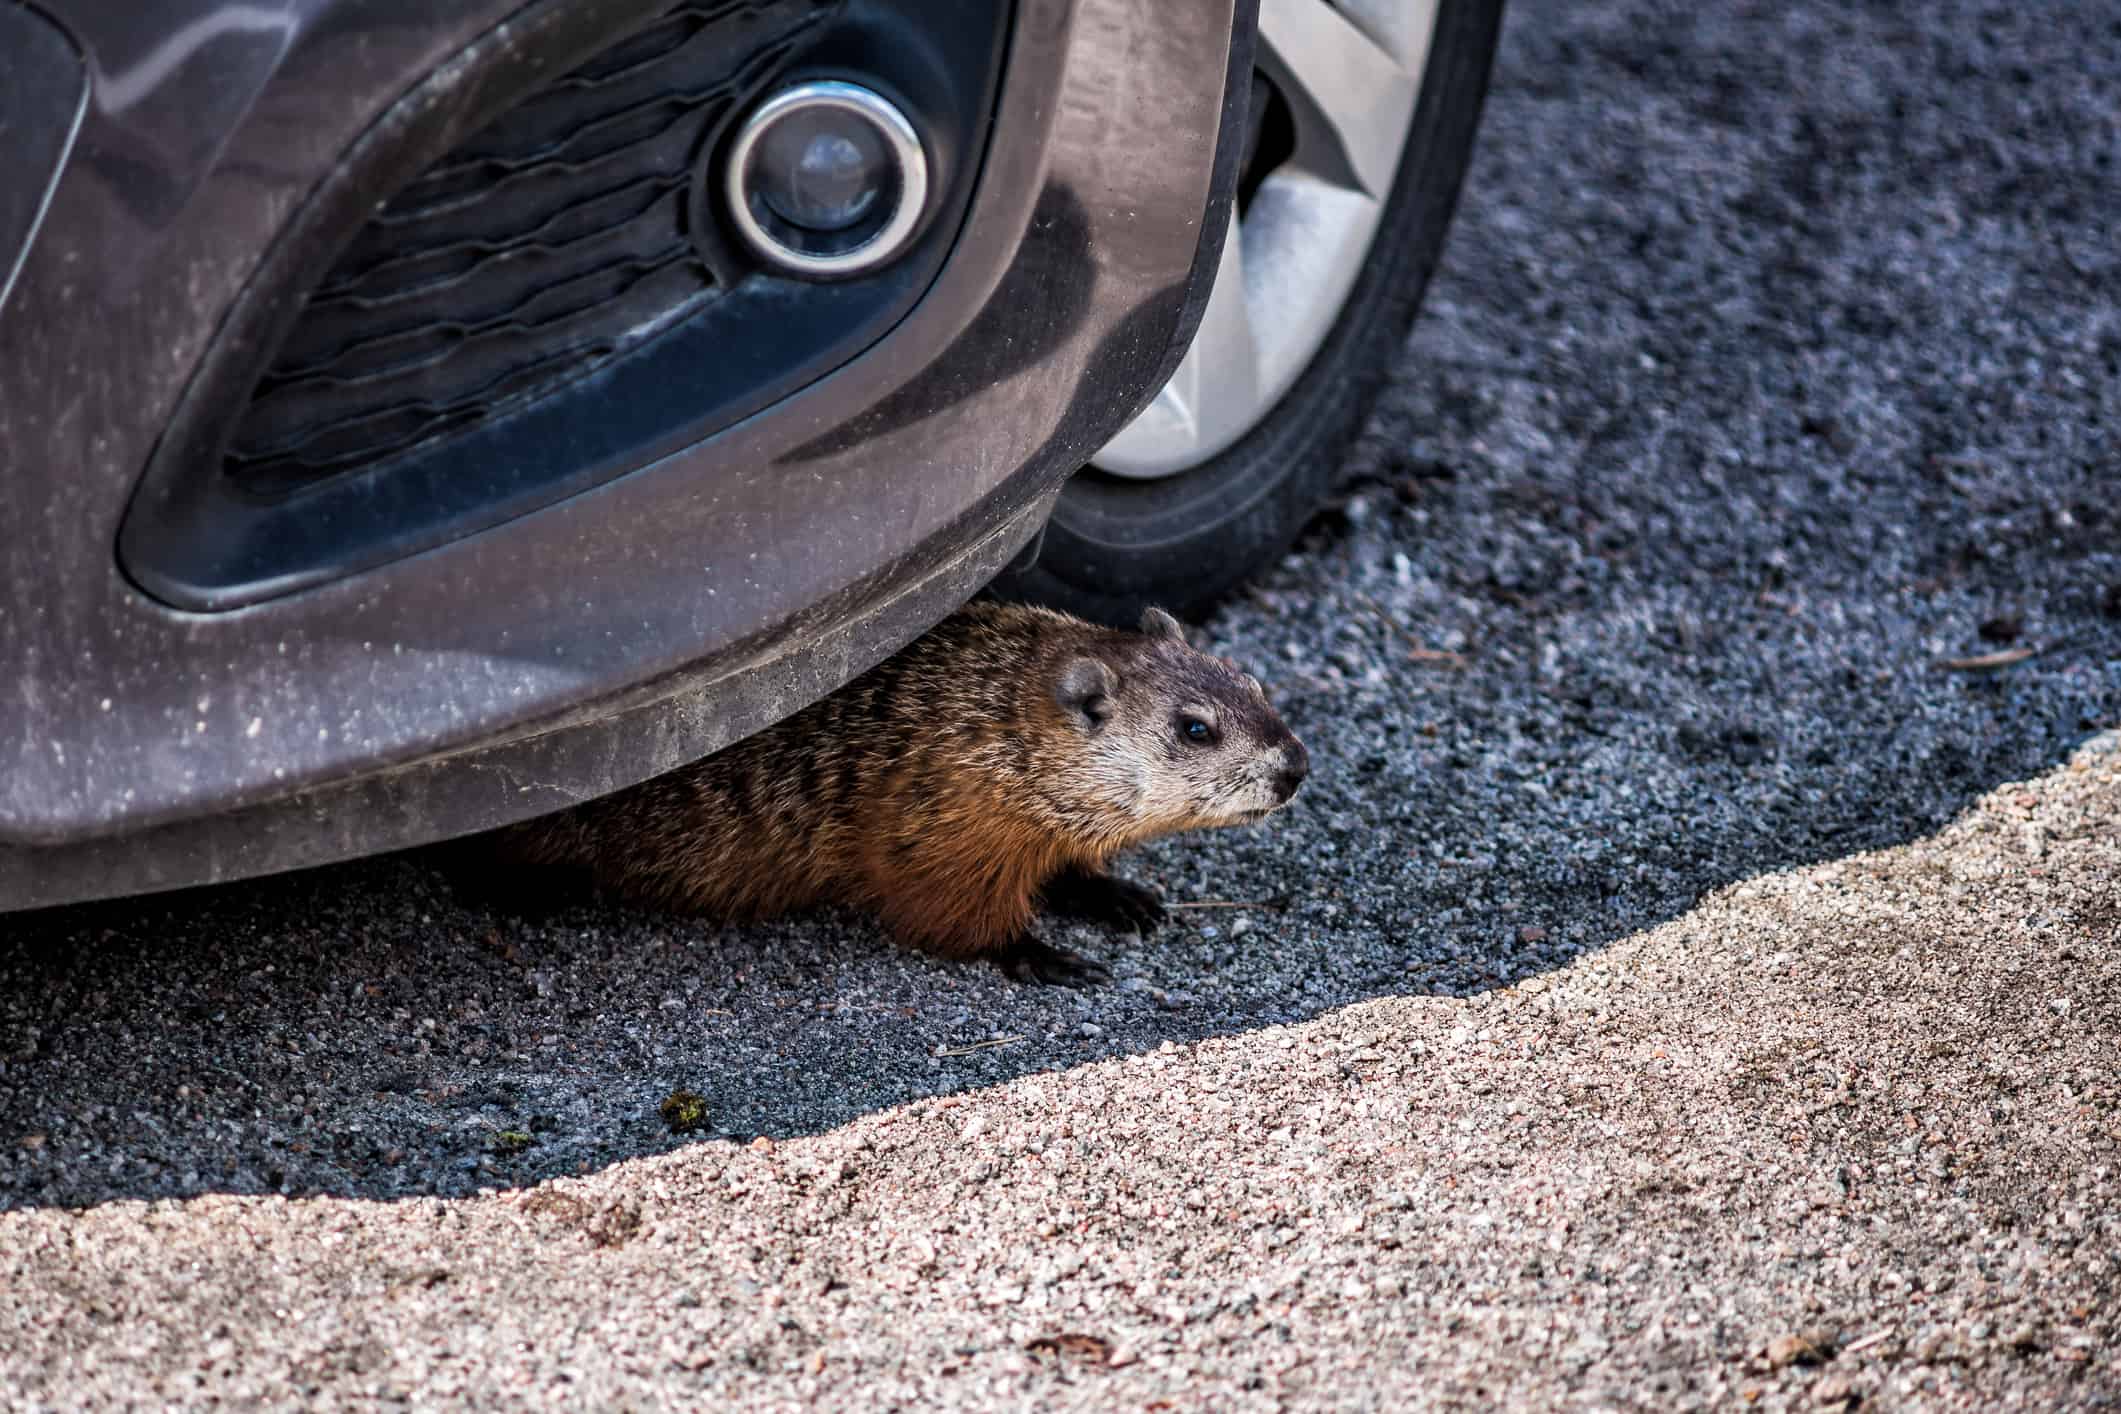 Closeup of rodent, woodchuck, muskrat or groundhog hiding under car by tire in shadow